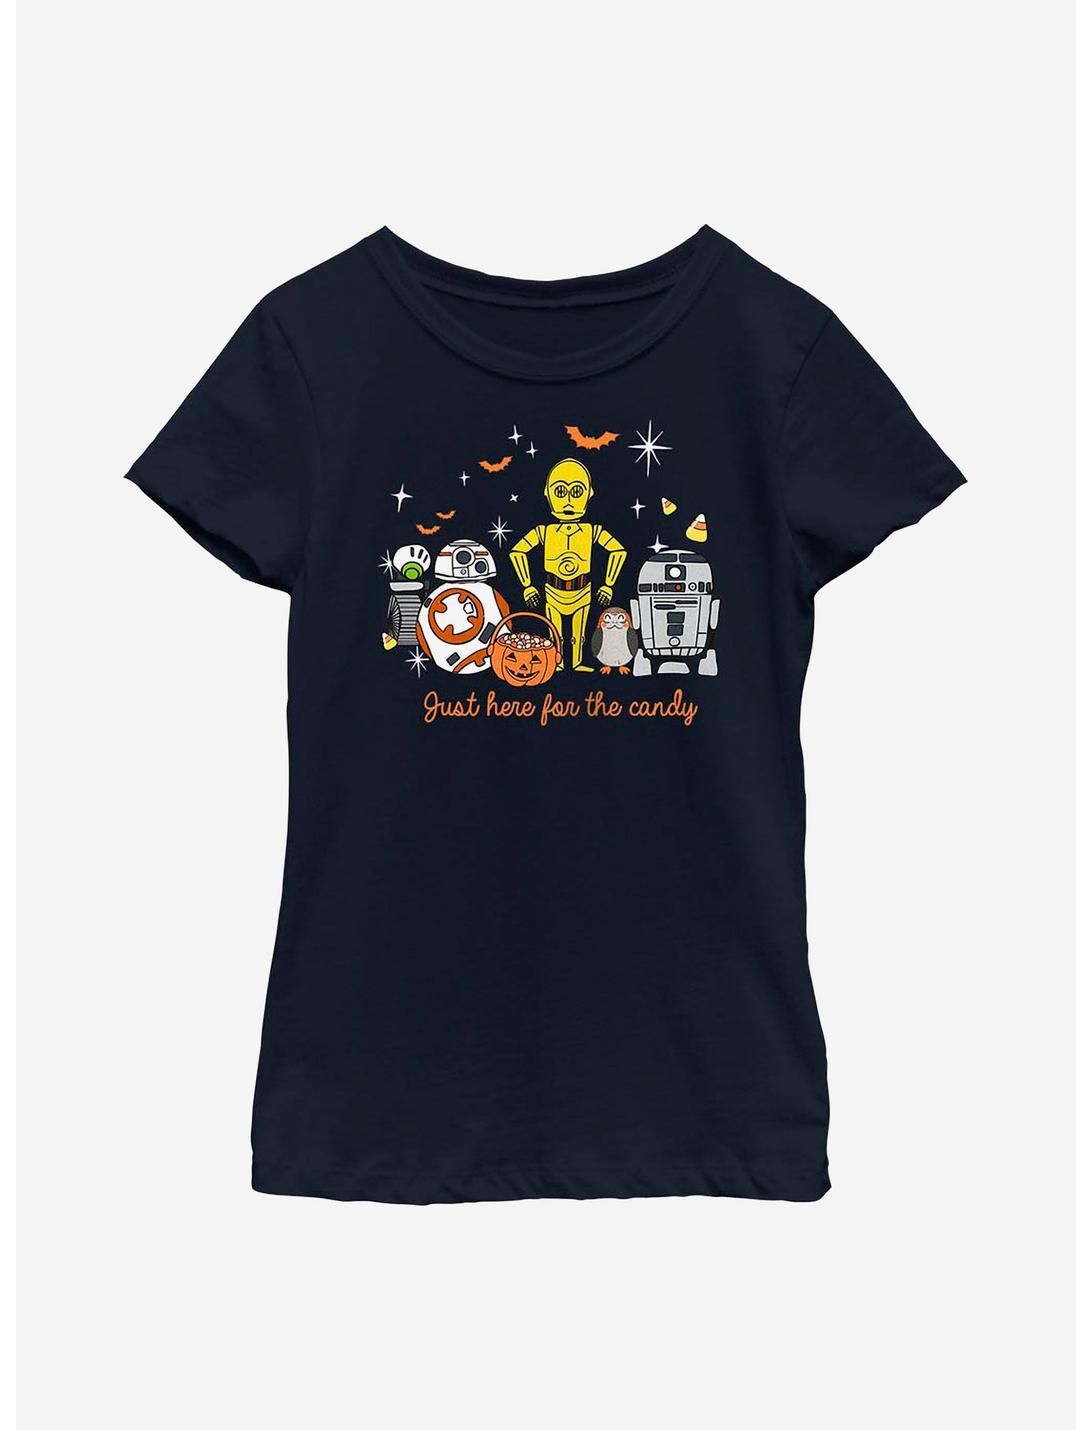 Star Wars Here For Candy Youth Girls T-Shirt, NAVY, hi-res